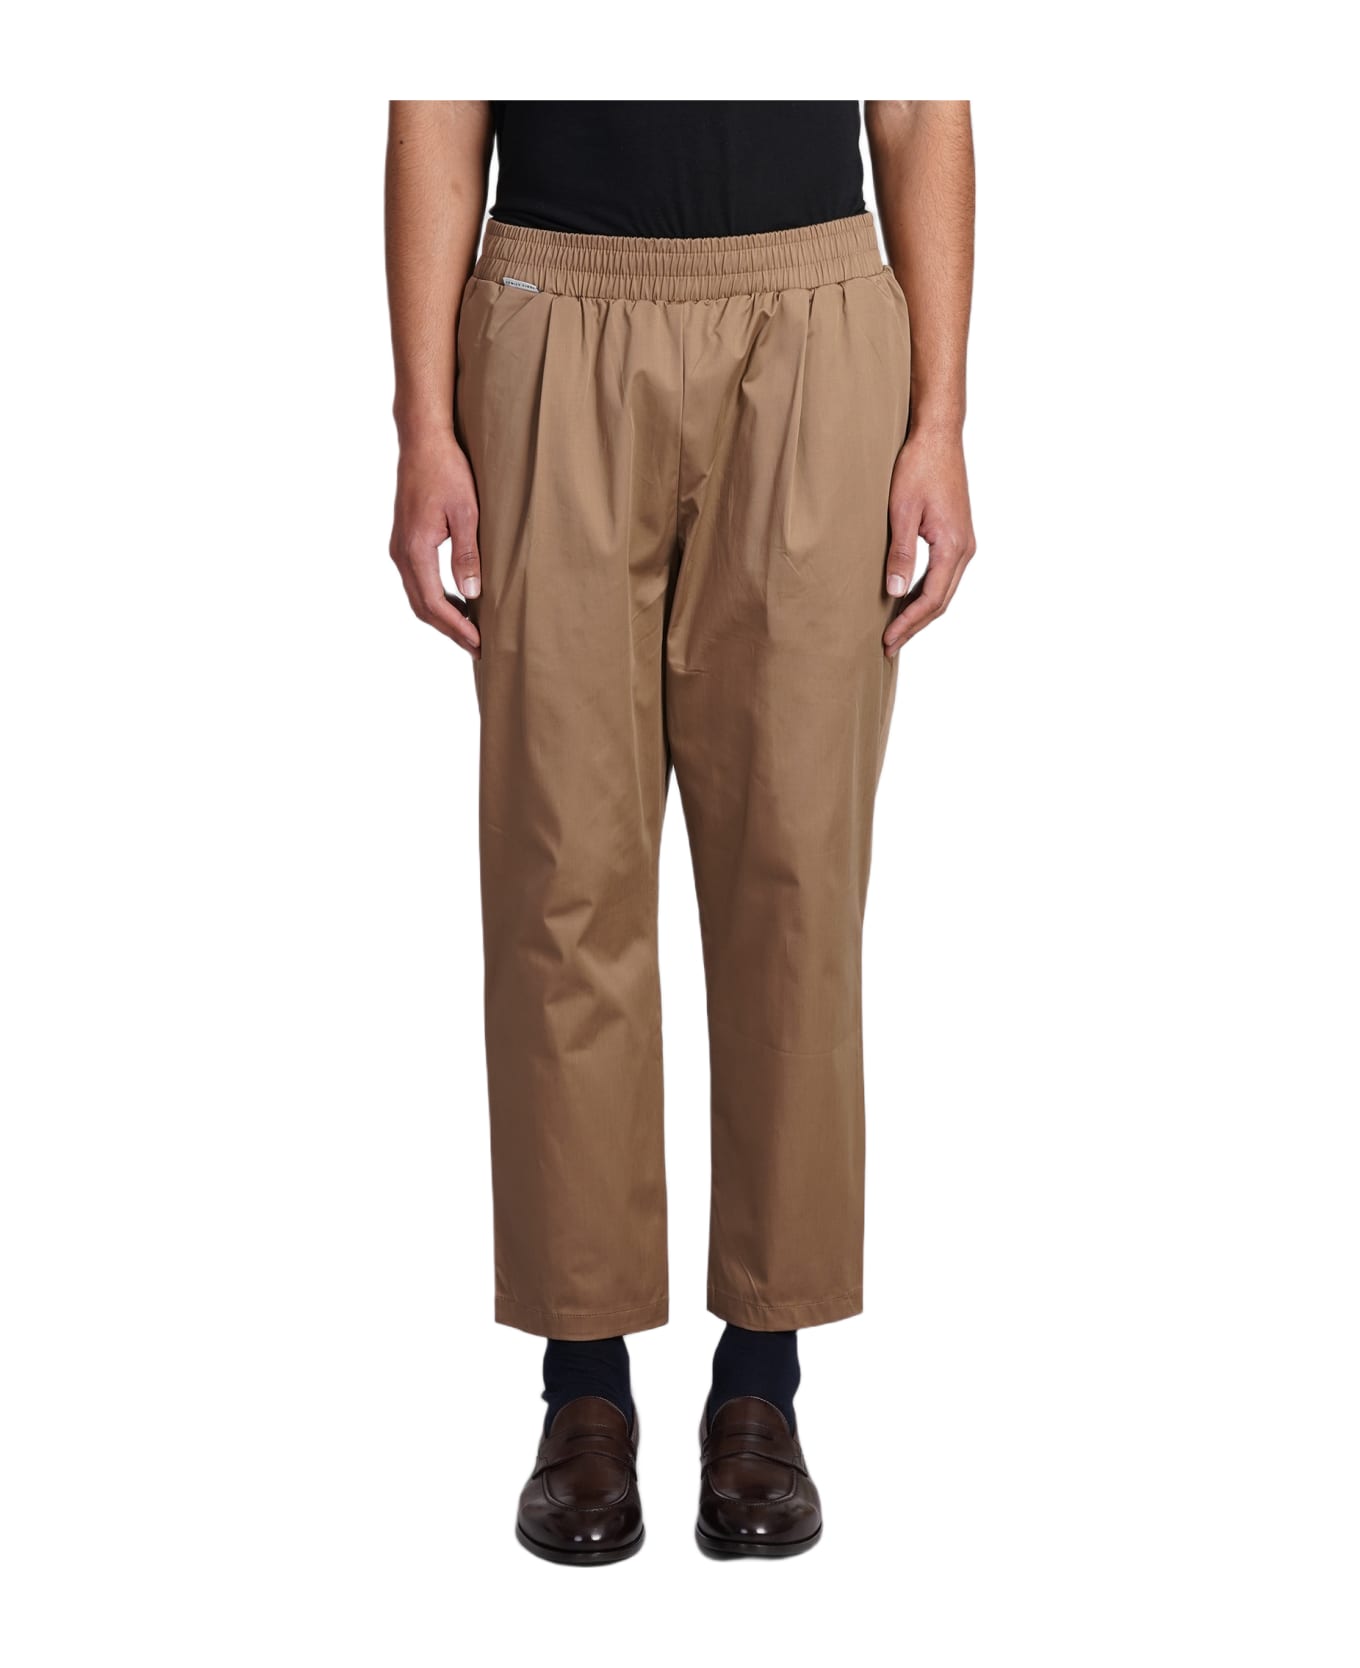 Family First Milano Pants In Camel Cotton - Camel